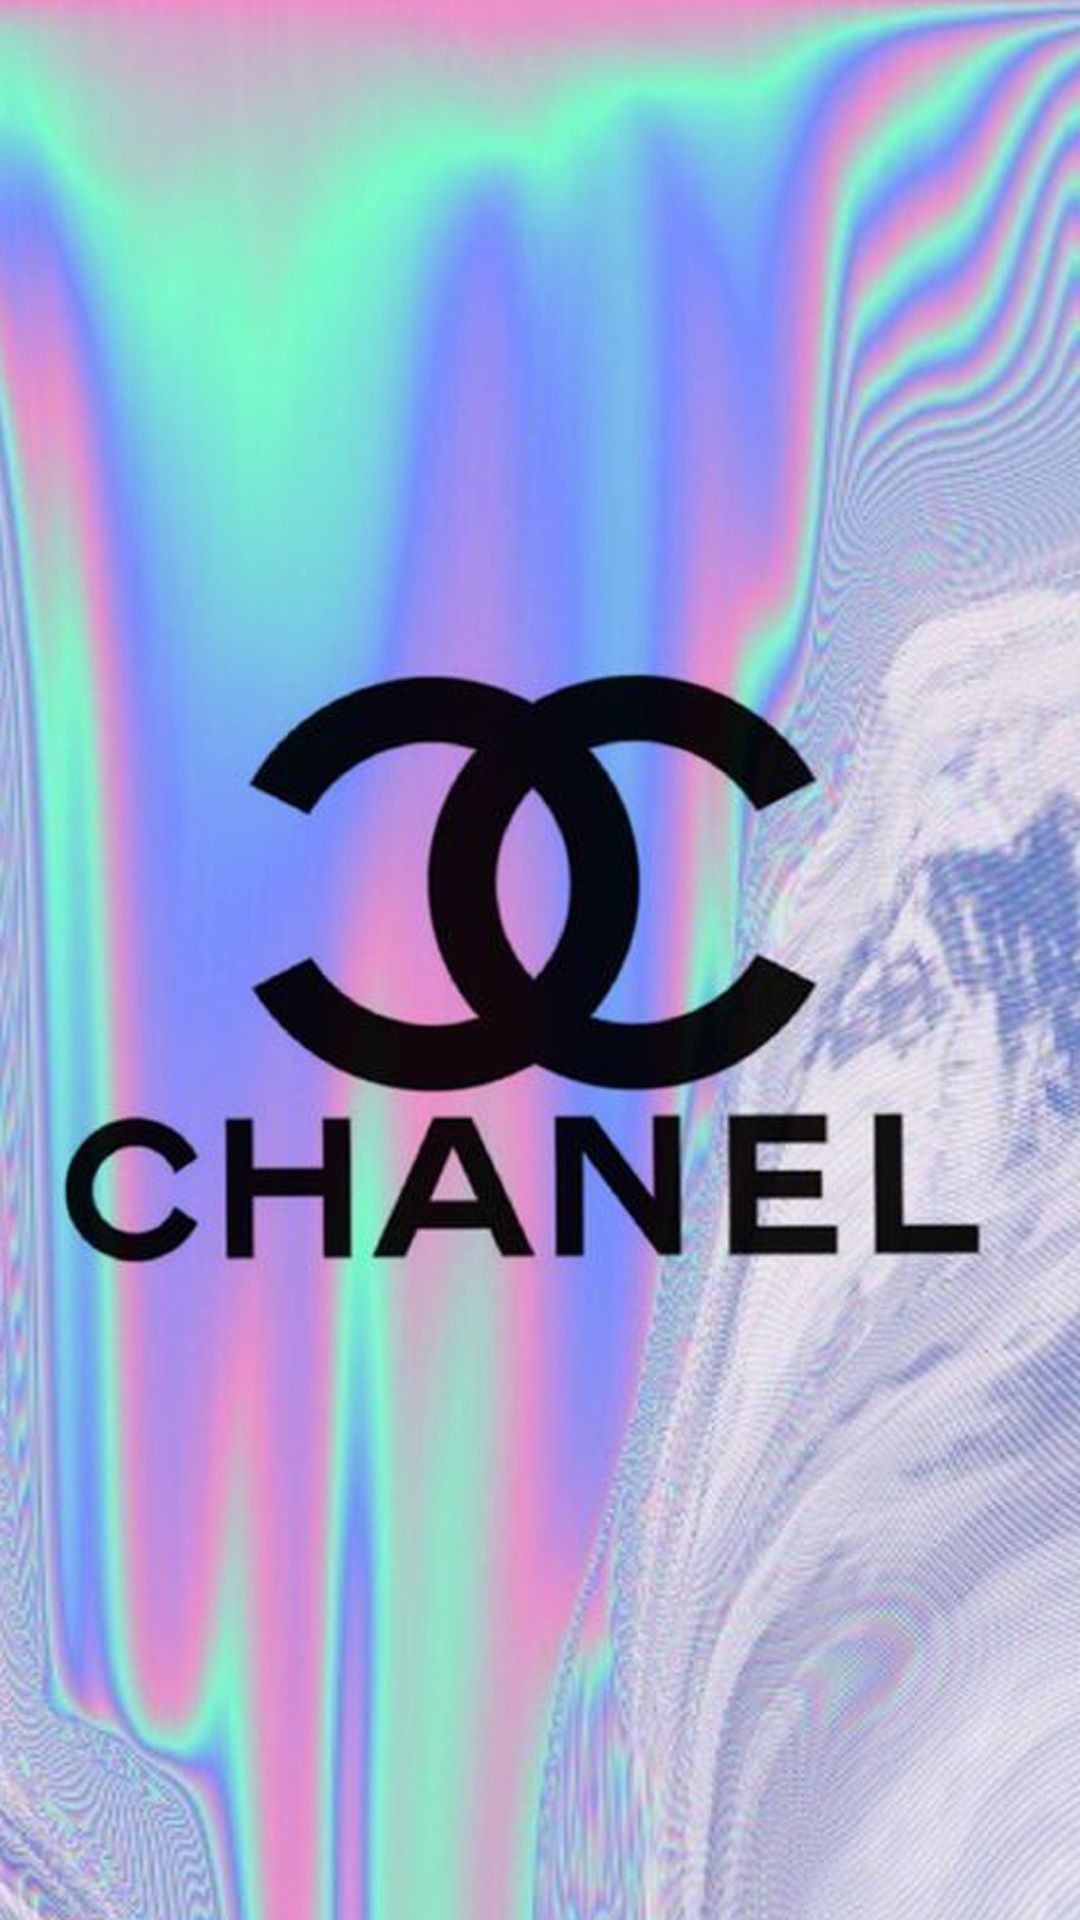 Chanel Tumblr Wallpaper, Iphone Background Wallpaper, - Girly Cute Wallpapers For Iphone - HD Wallpaper 